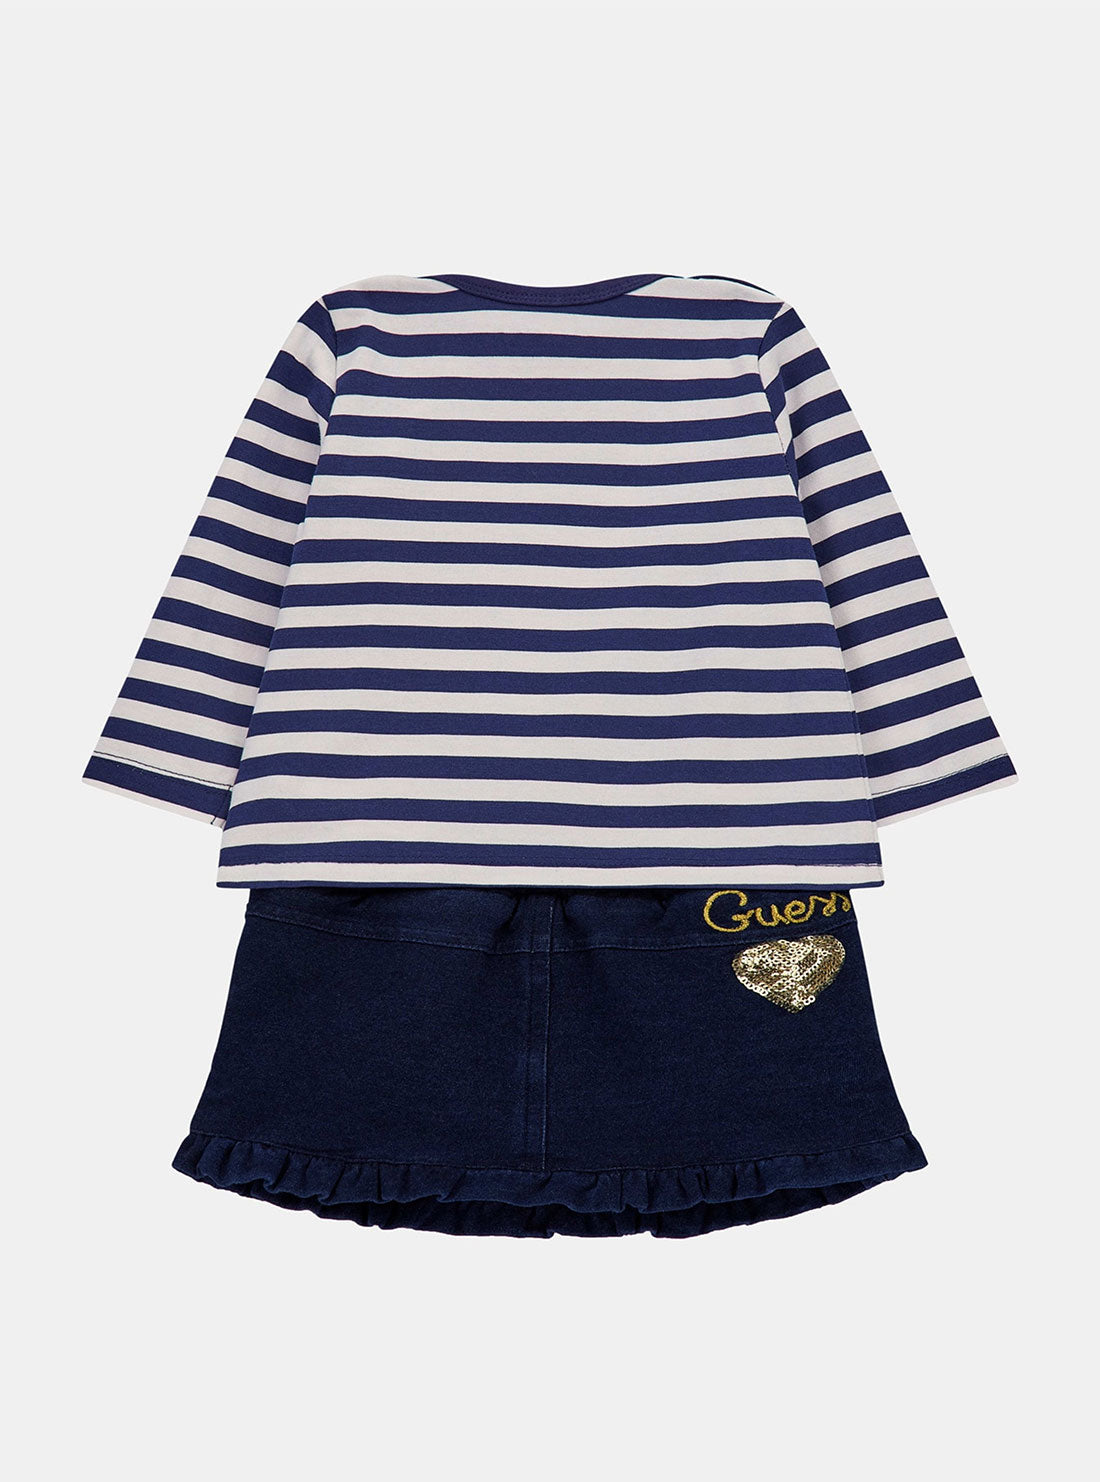 GUESS Navy White Long Sleeve and Denim Skirt Set (3-18M) back view